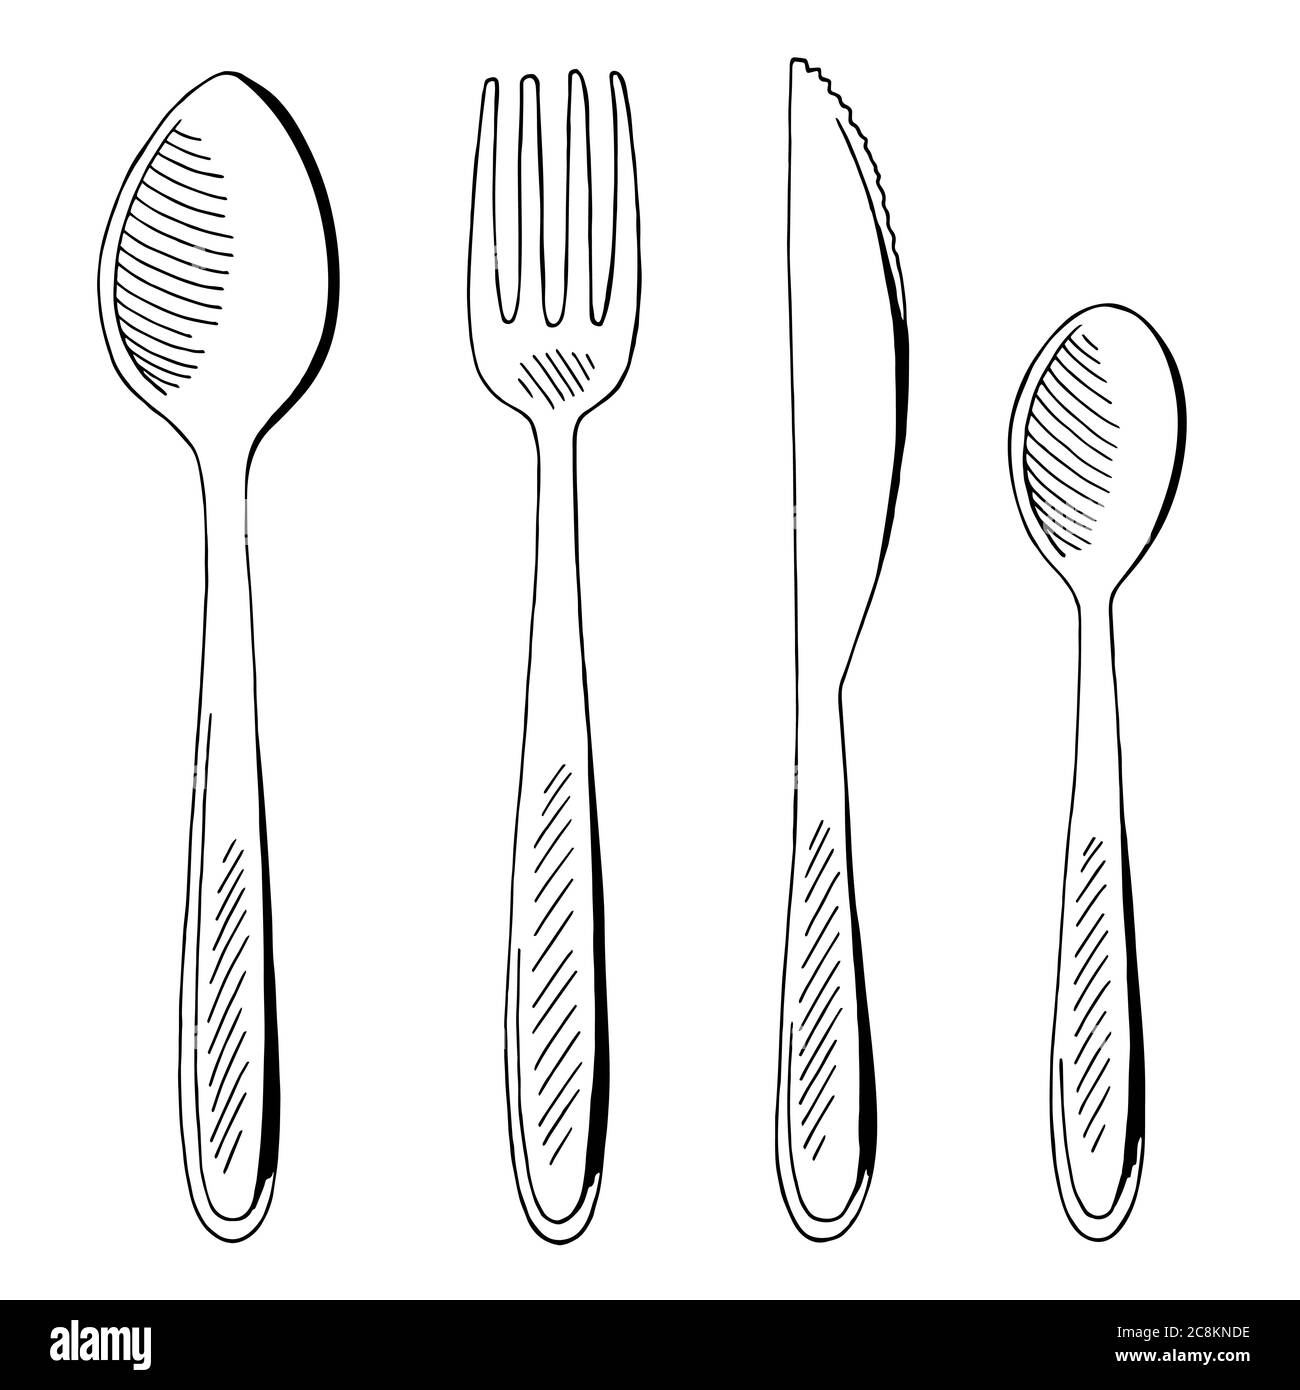 Fork spoon knife set graphic black white isolated sketch illustration vector Stock Vector